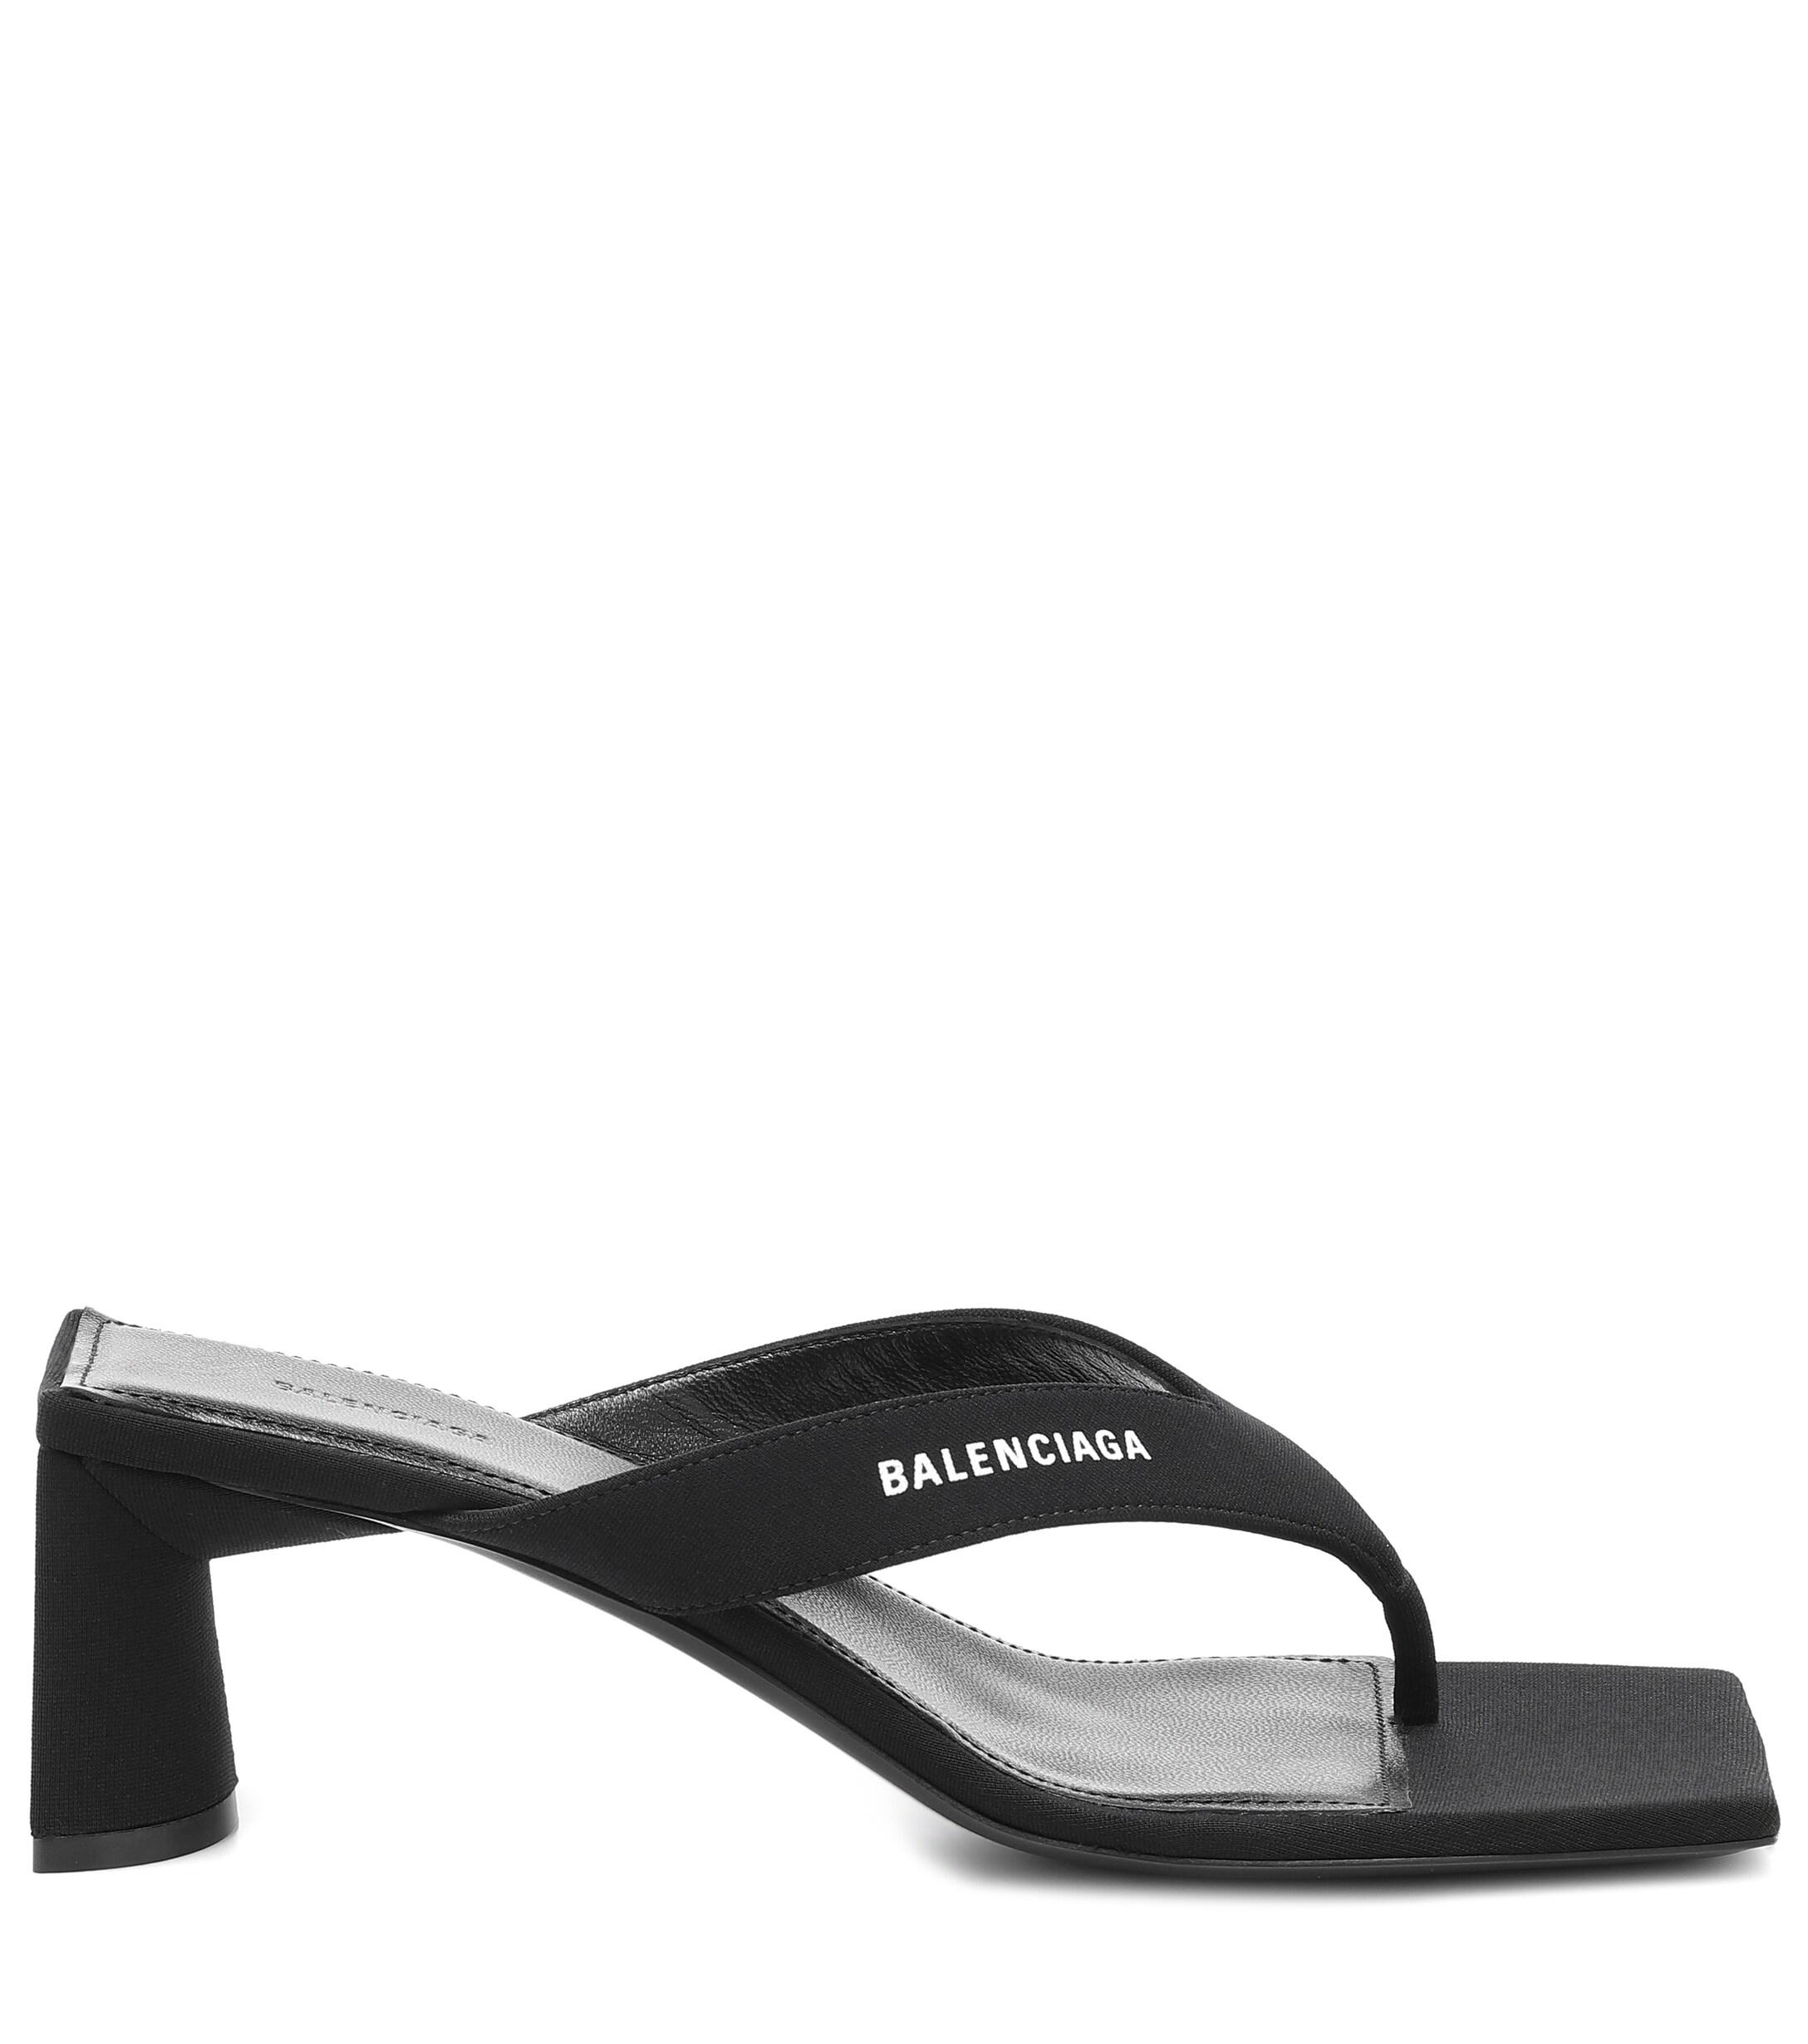 Balenciaga Double Square Thong Sandals in Black | Lyst